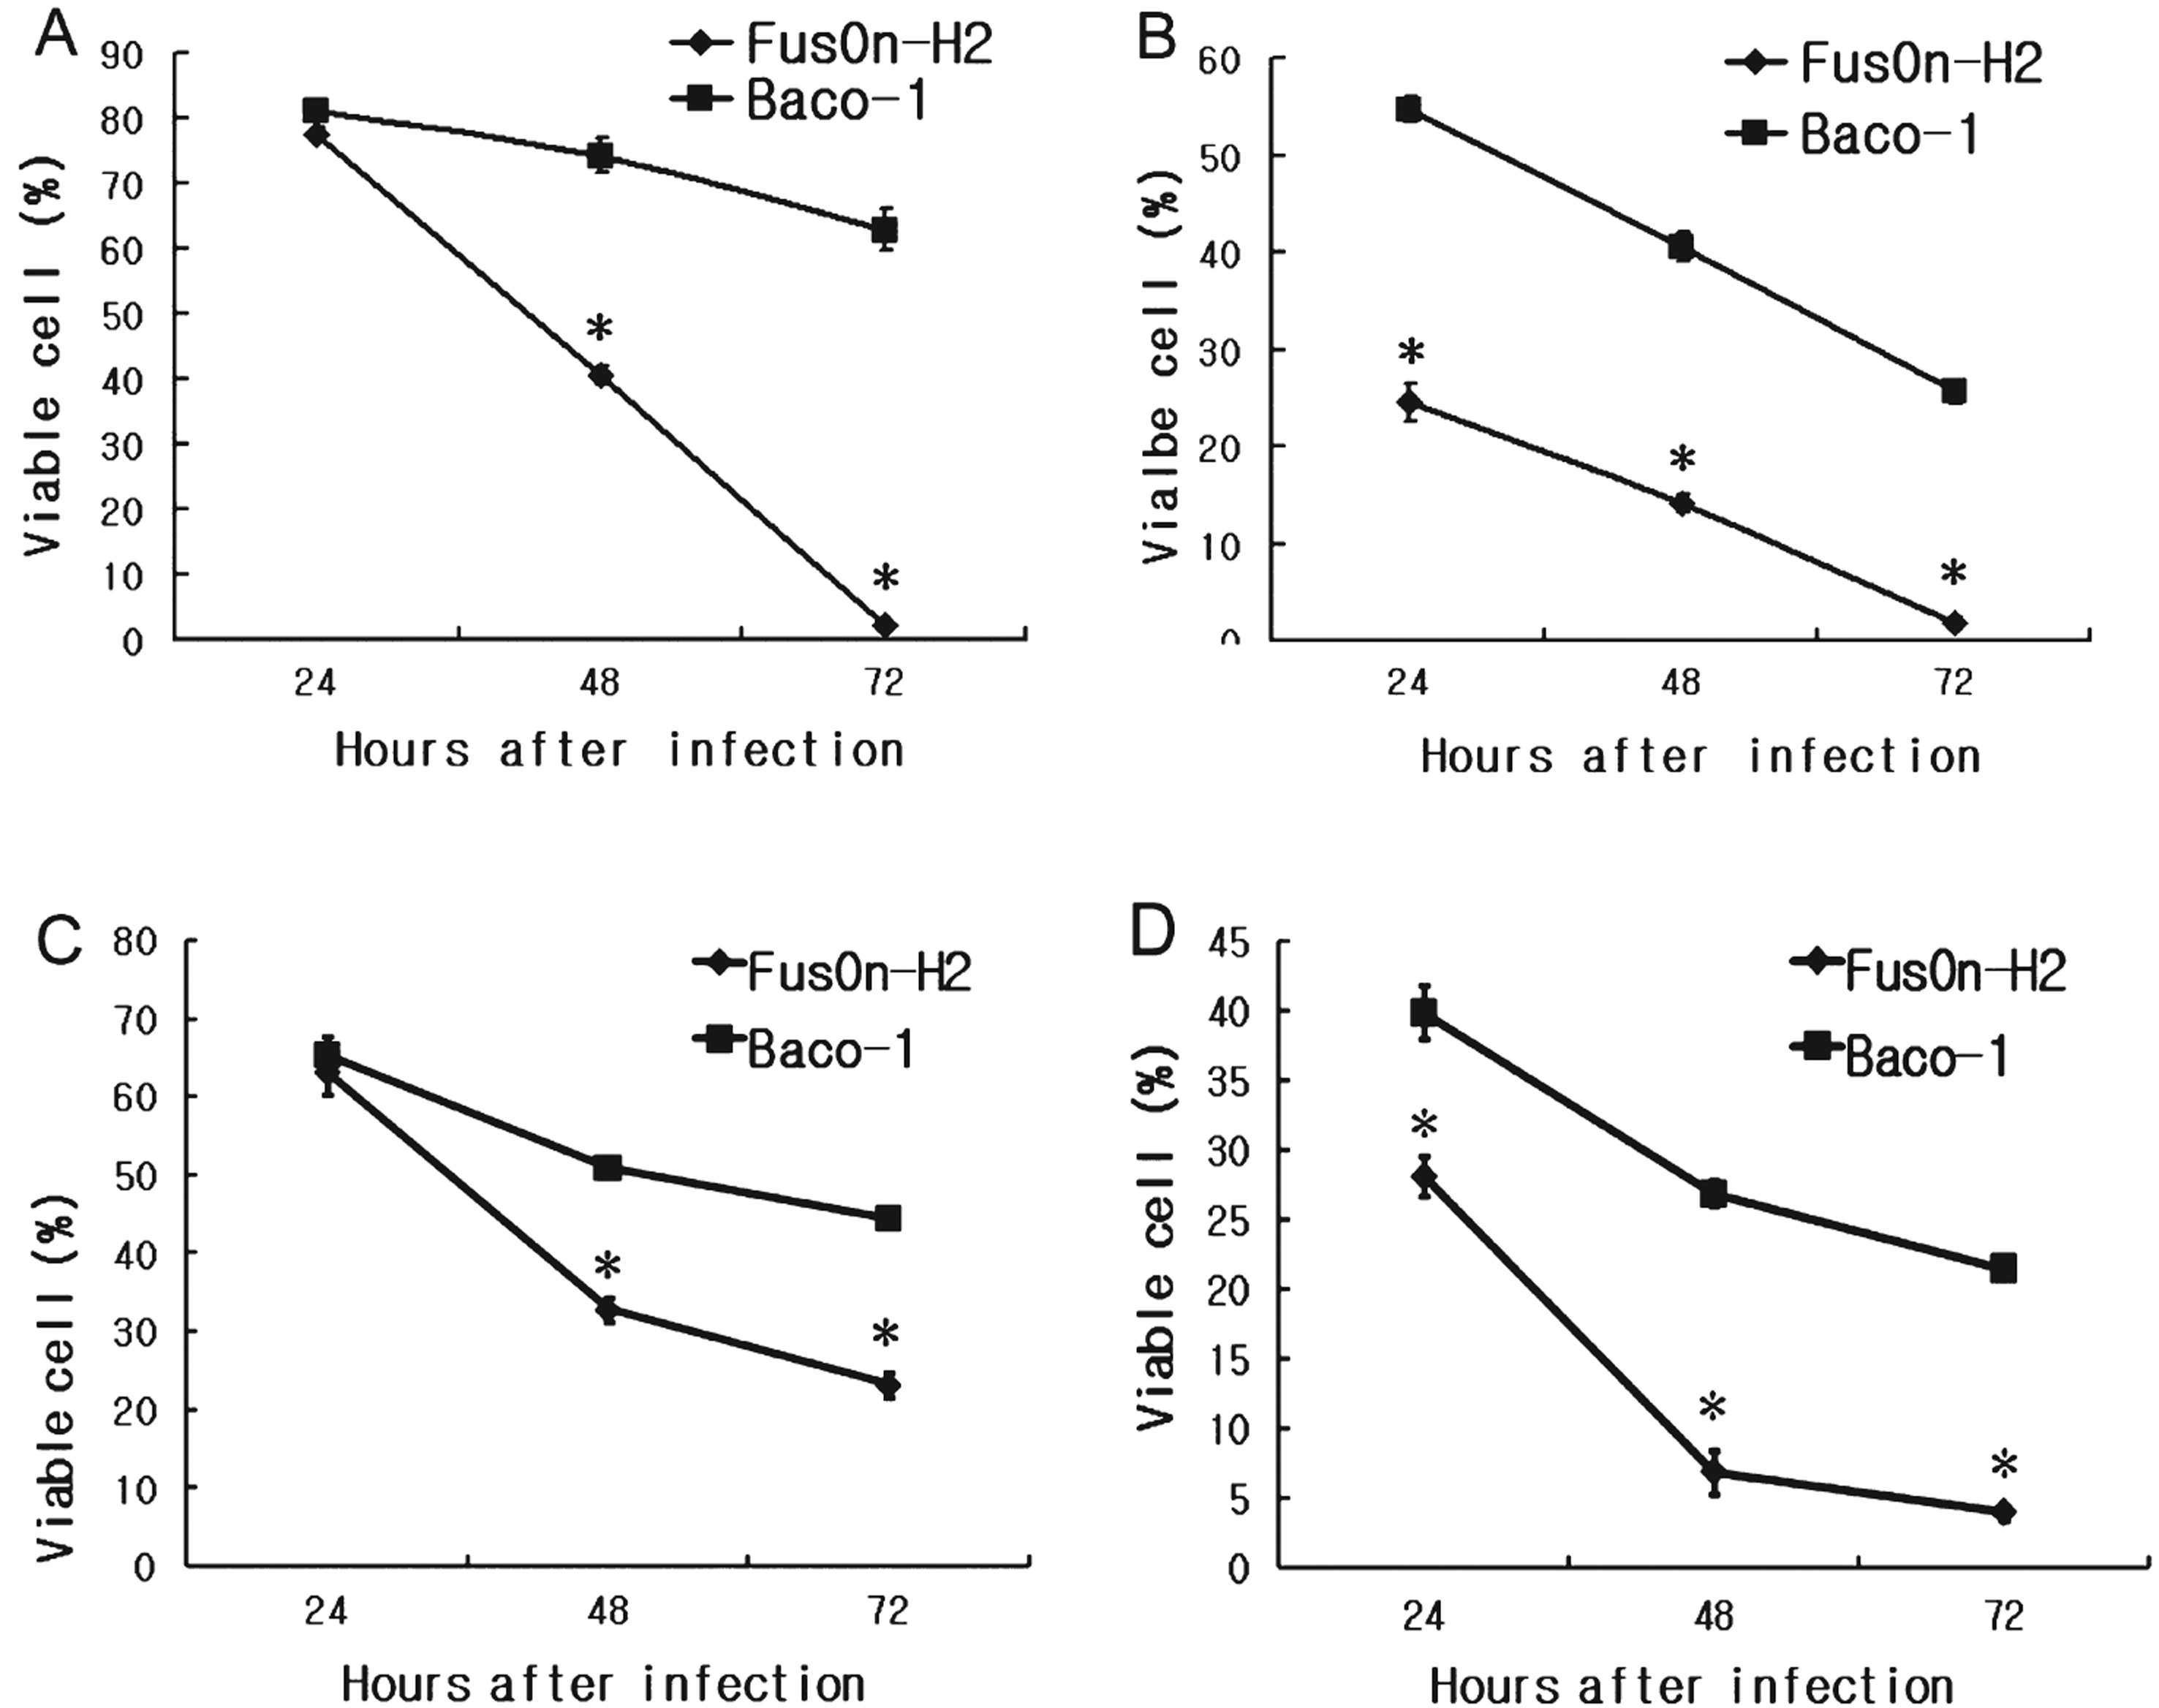 
          Oncolytic activity of FusOn-H2 against 5637 and MBT-2 cells in vitro. The 5637 cells were seeded in 24-well plates and infected with Baco-1 or with FusOn-H2 at a dose of either 0.01 pfu/cell (A) or 0.1 pfu/cell (B). The MBT-2 cells were seeded in 24-well plates and infected with Baco-1 or with FusOn-H2 at a dose of either 1.0 pfu/cell (C) or 10.0 pfu/cell (D). The cells were harvested at 24, 48, or 72 hours after infection, and cell viability was determined by trypan blue staining. Percent cell viability = [(number of viable cells in the infected wells)/ (number of viable cells in the uninfected wells)]×100. The bars represent mean±standard deviation.  *
          p <  0.05.
        